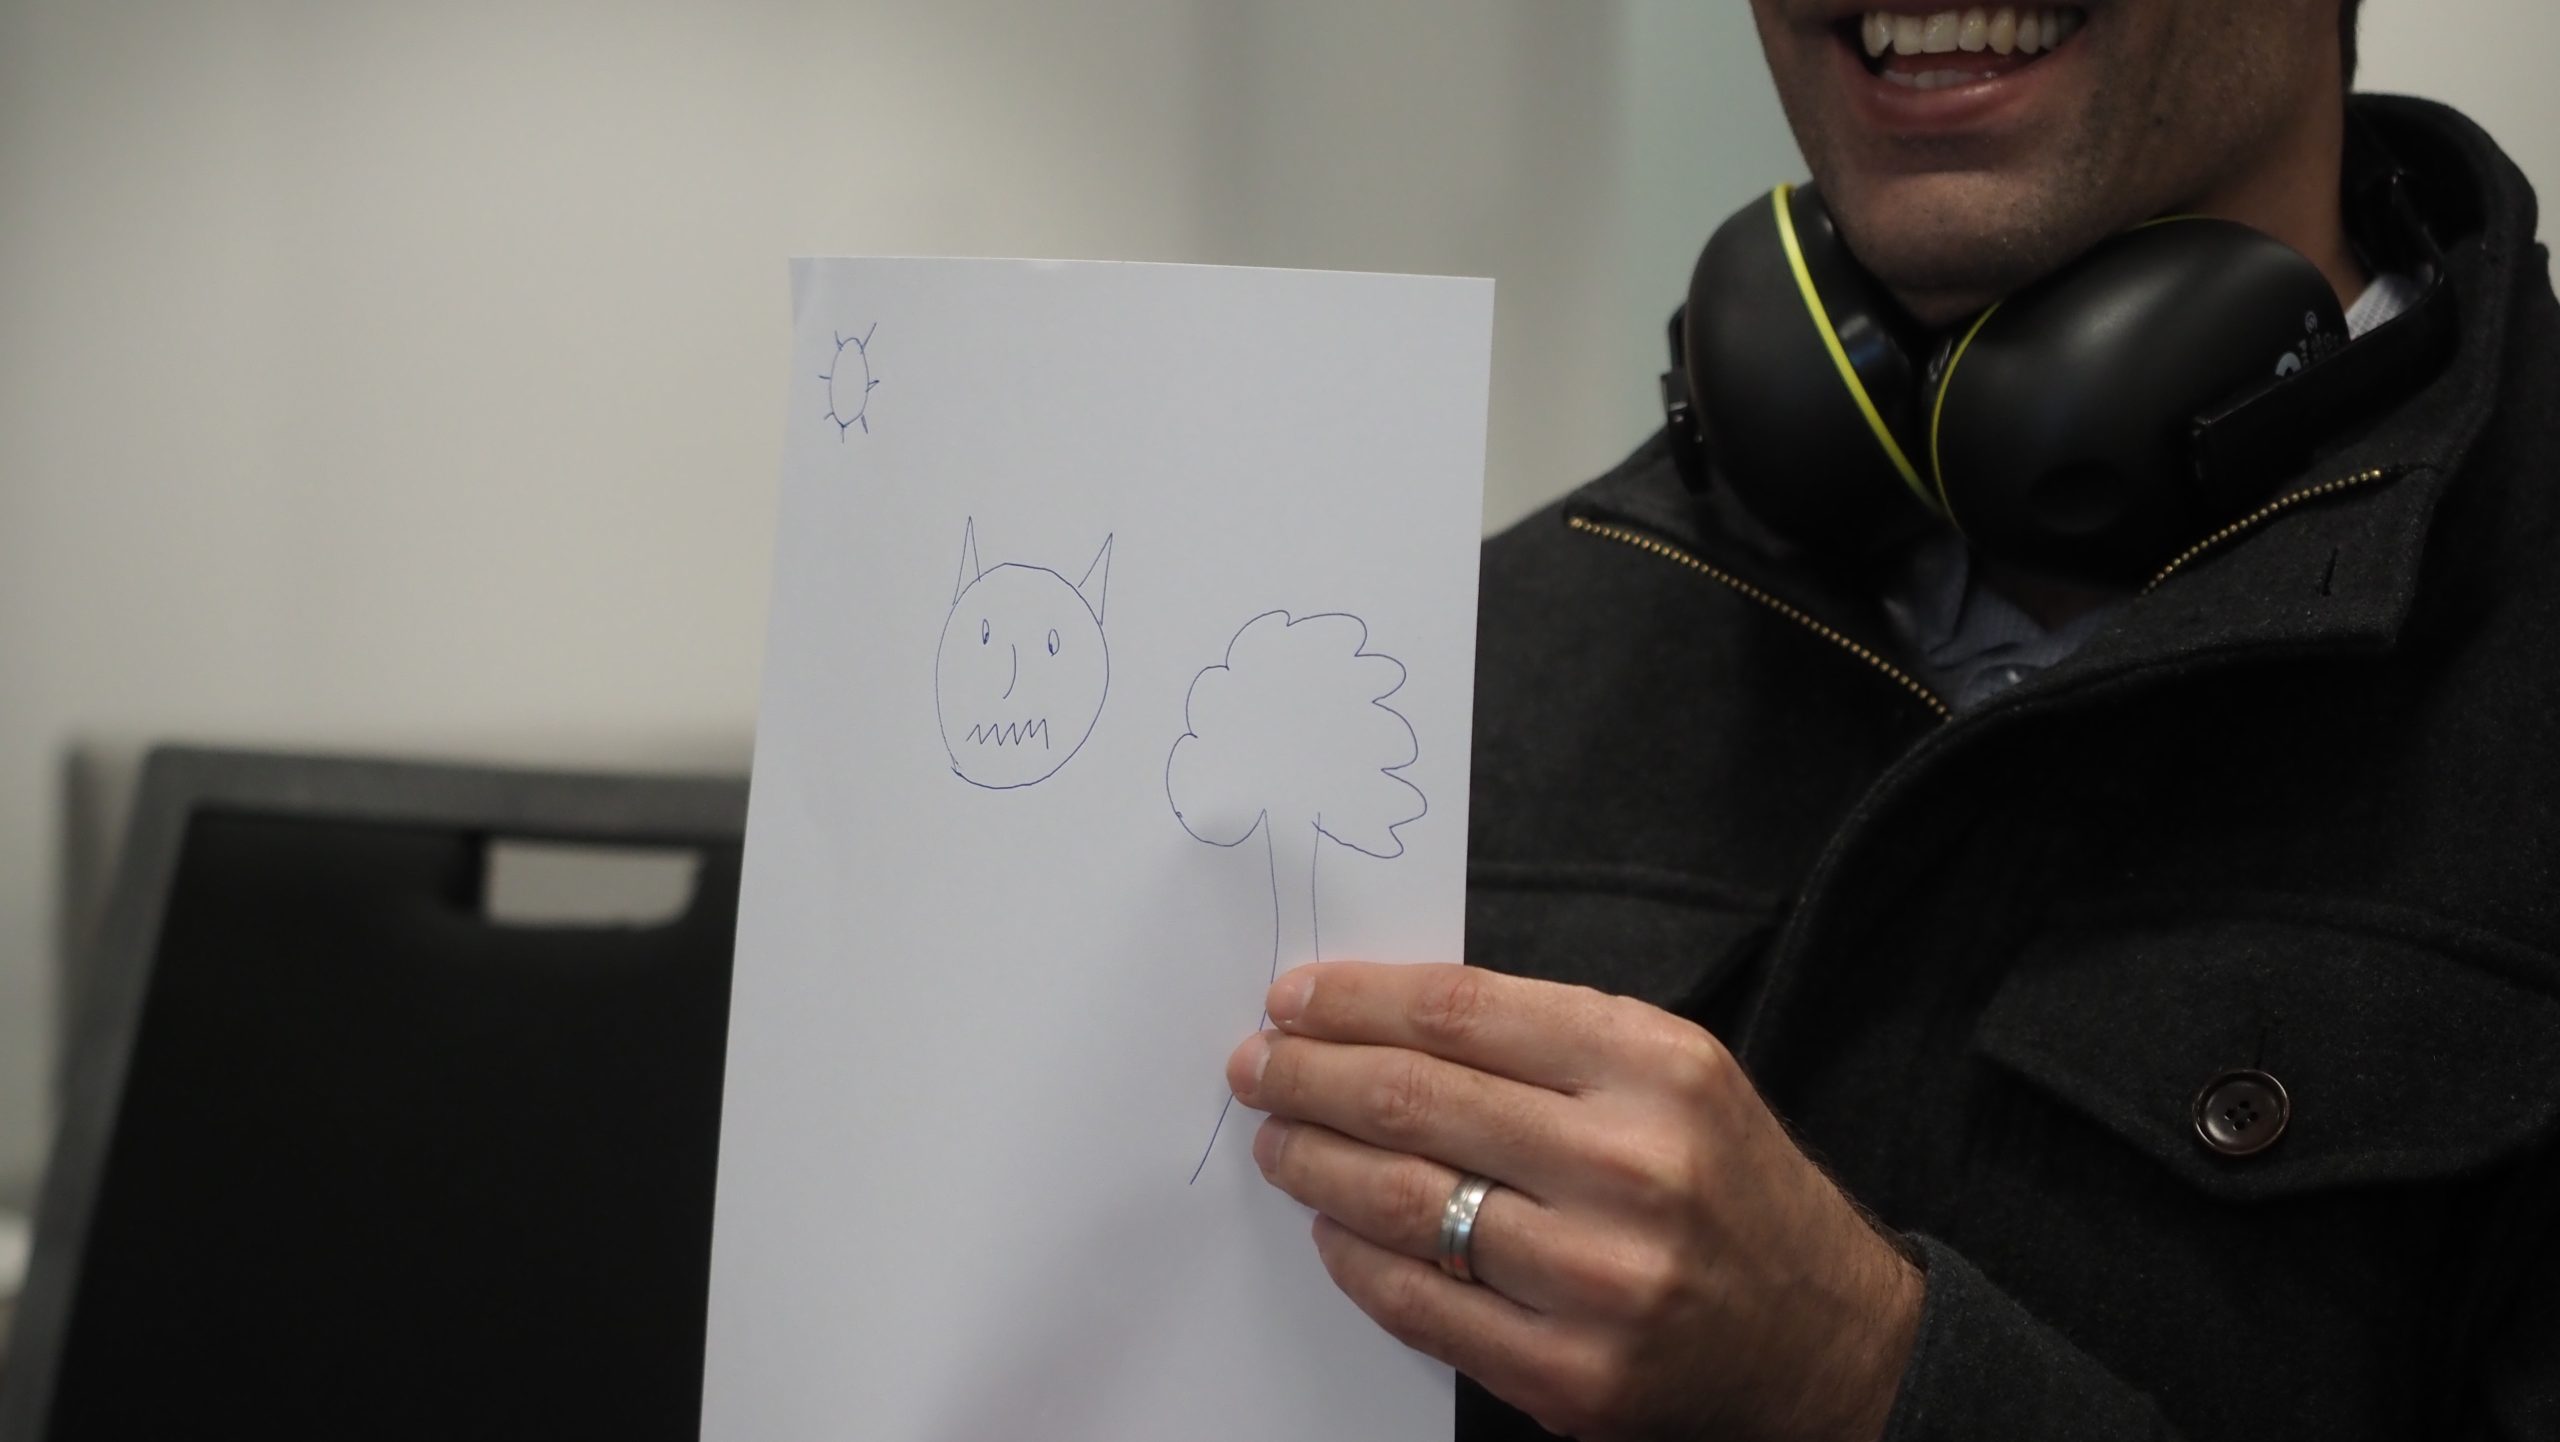 Smiling face of man holding up white piece of paper with drawing on it